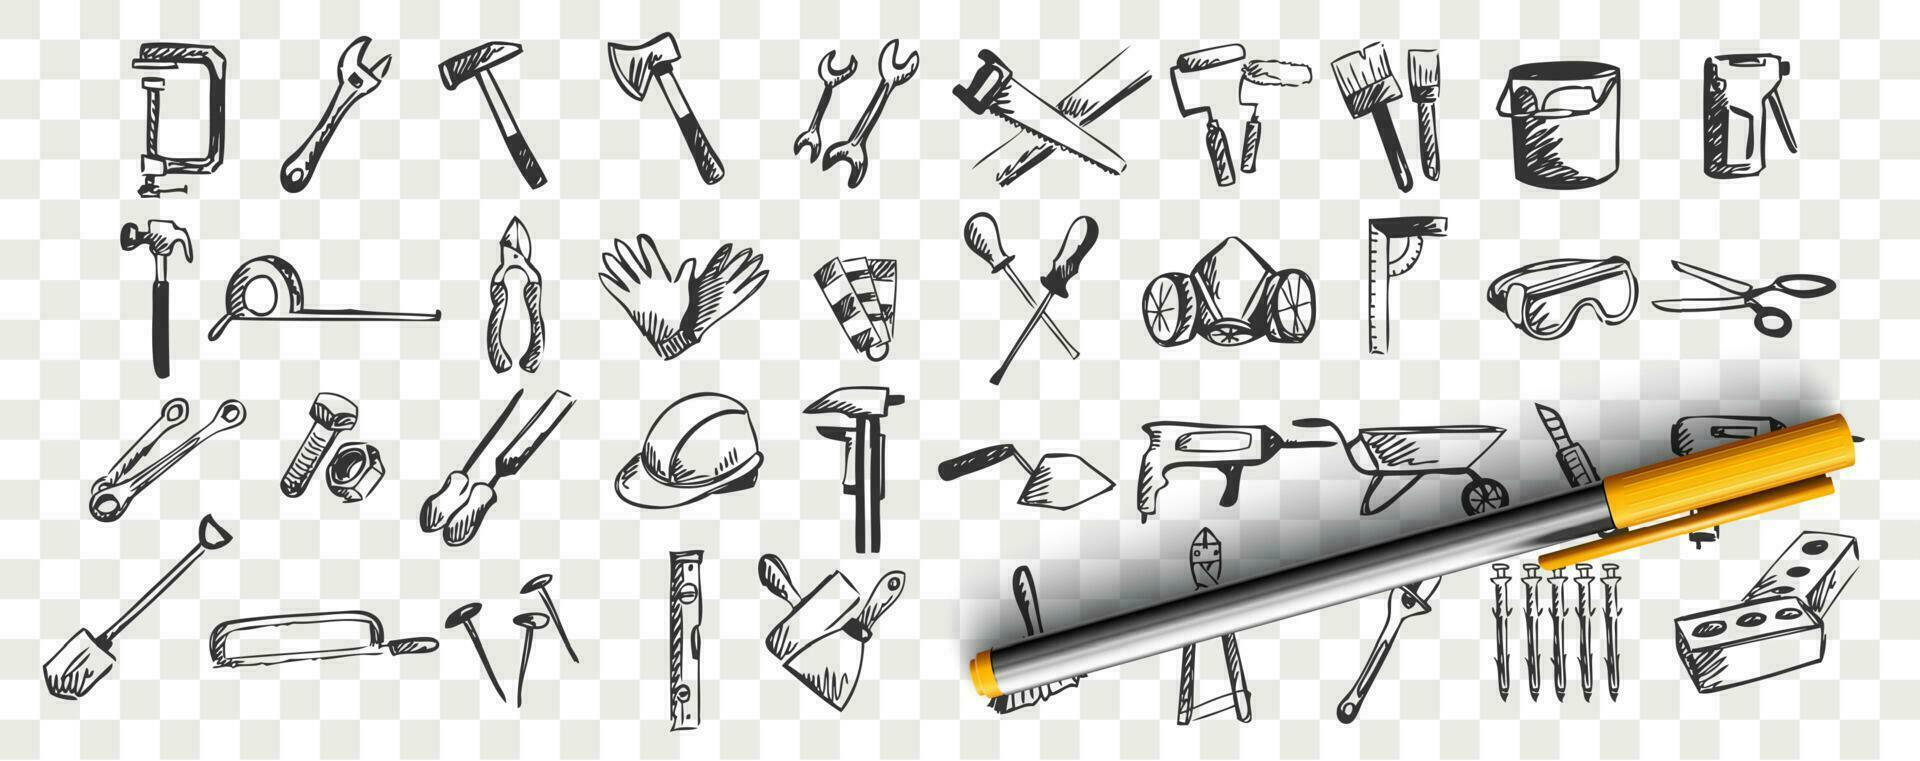 Repairs doodle set. Collection of hand drawn patterns sketches templates of working tools and instruments screwdriver drill spatula on transparent background. Maintenance equipment illustration. vector